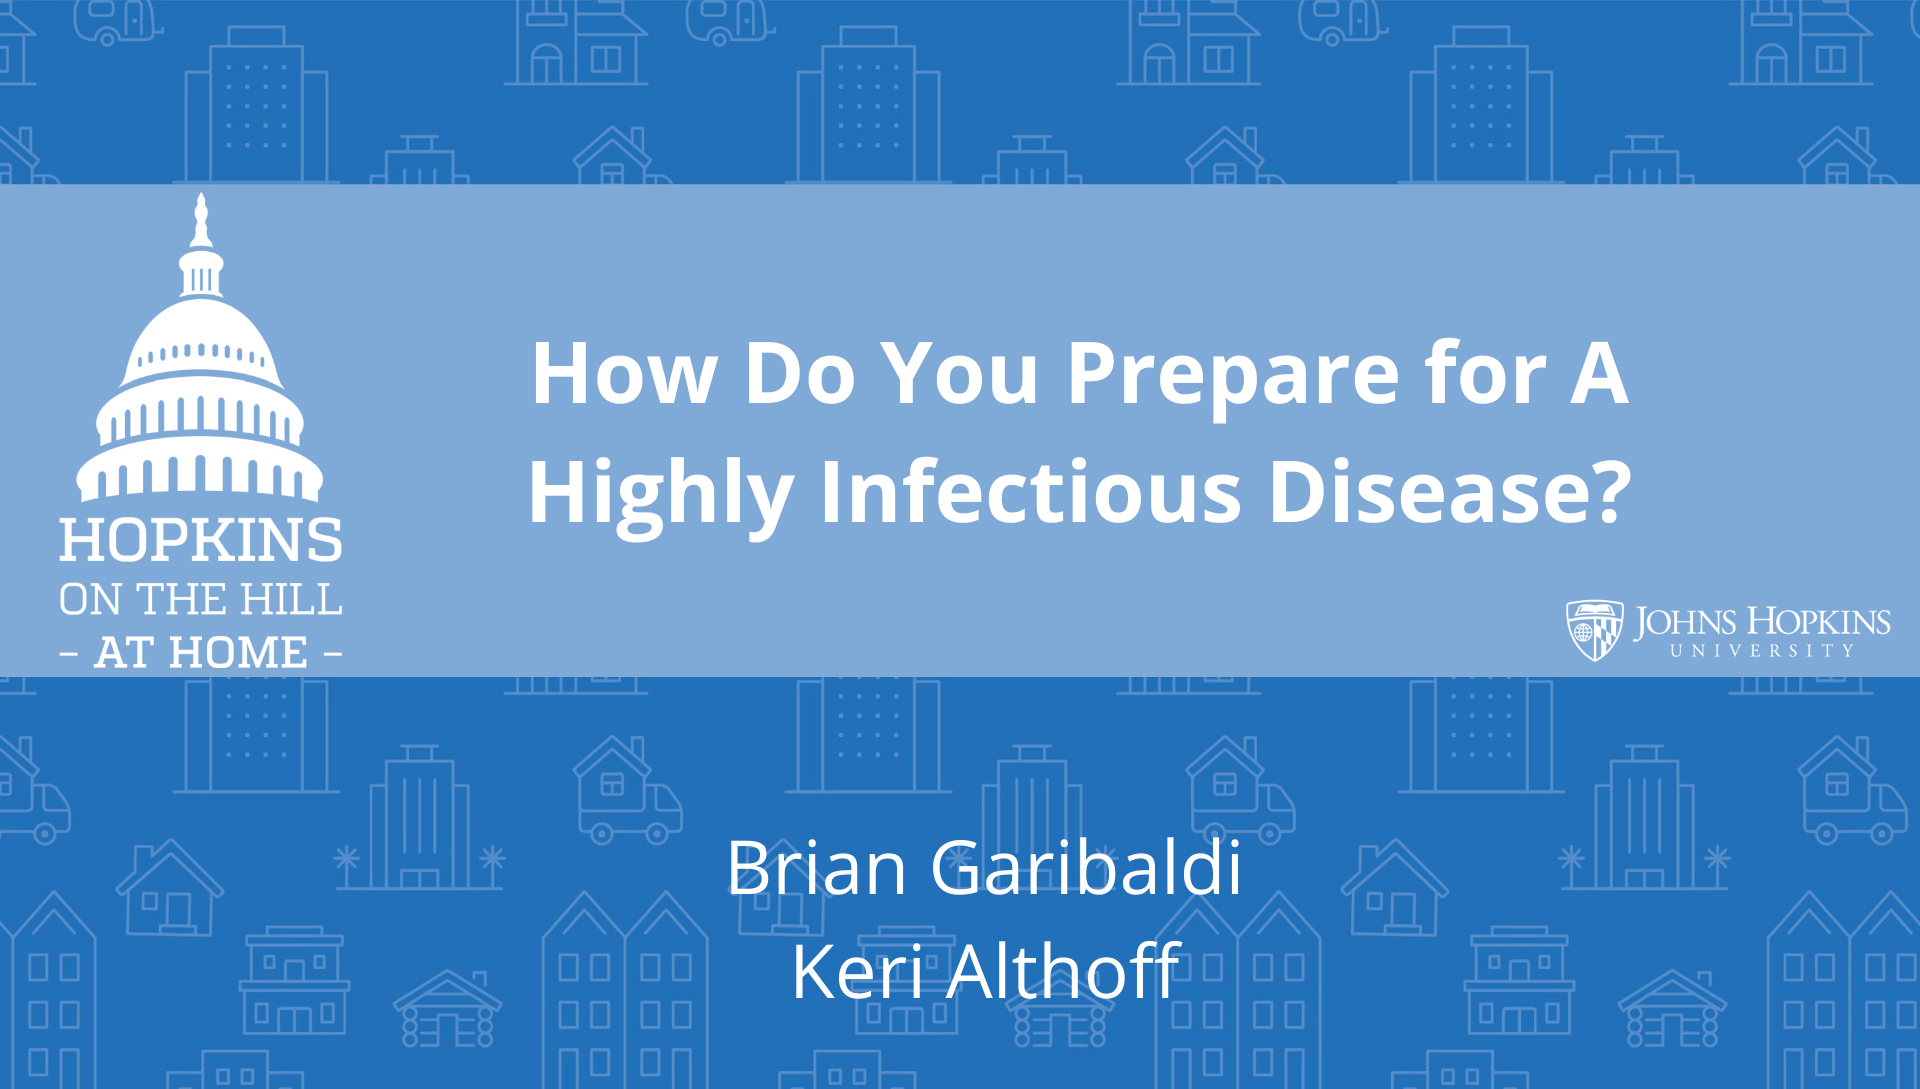 Solid blue background featuring line drawings of various types of homes with text reading “How do you prepare for a highly infectious disease?” and names listed below: Brian Garibaldi, Keri Althoff. On the left the Hopkins on the Hill at Home logo featuring the Capitol Dome. On the right, the Johns Hopkins University logo. 